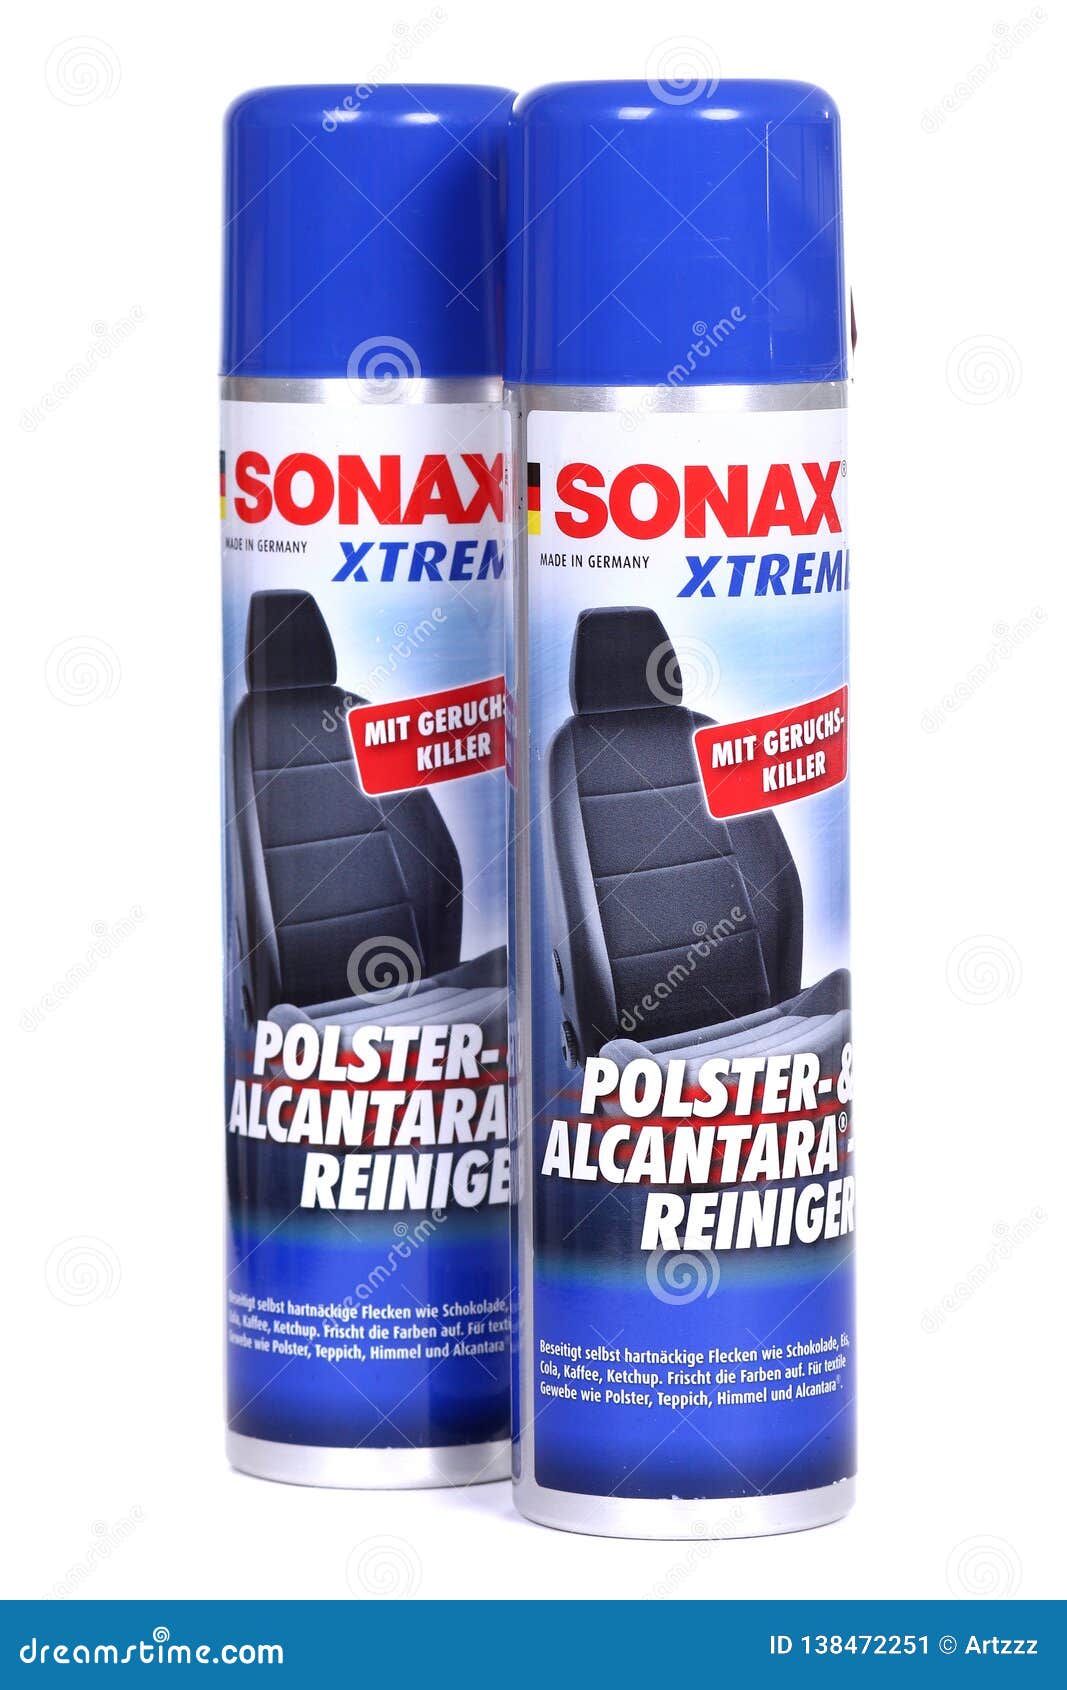 Sonax Upholstery and Alcantara Cleaner - Detailer's Domain, Sonax Alcantara  Cleaner